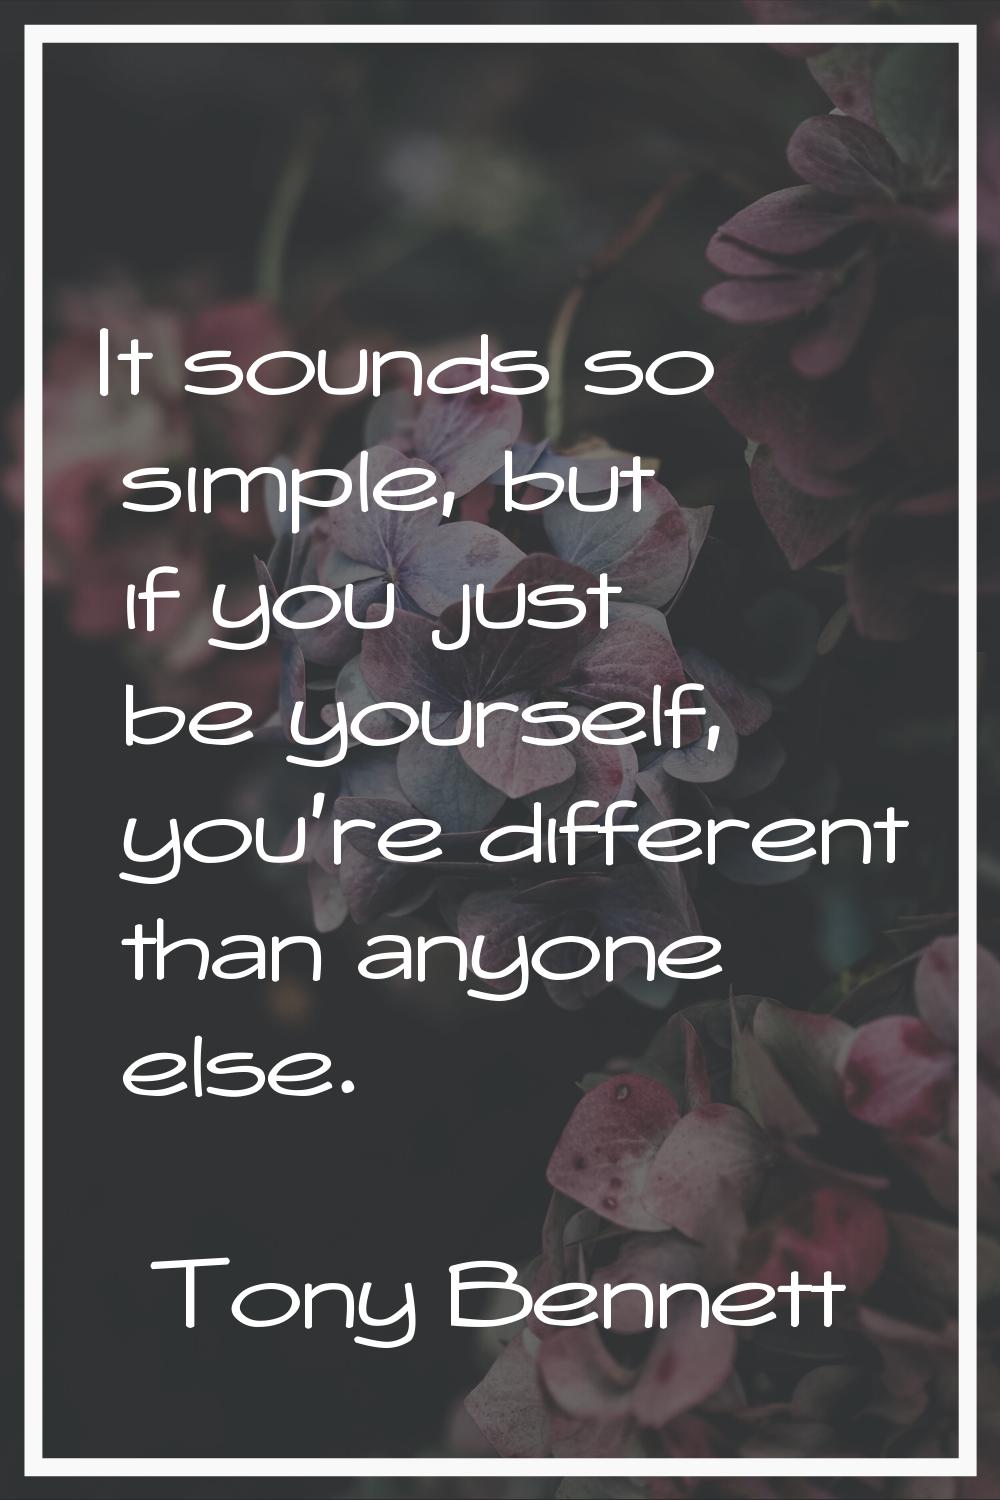 It sounds so simple, but if you just be yourself, you're different than anyone else.